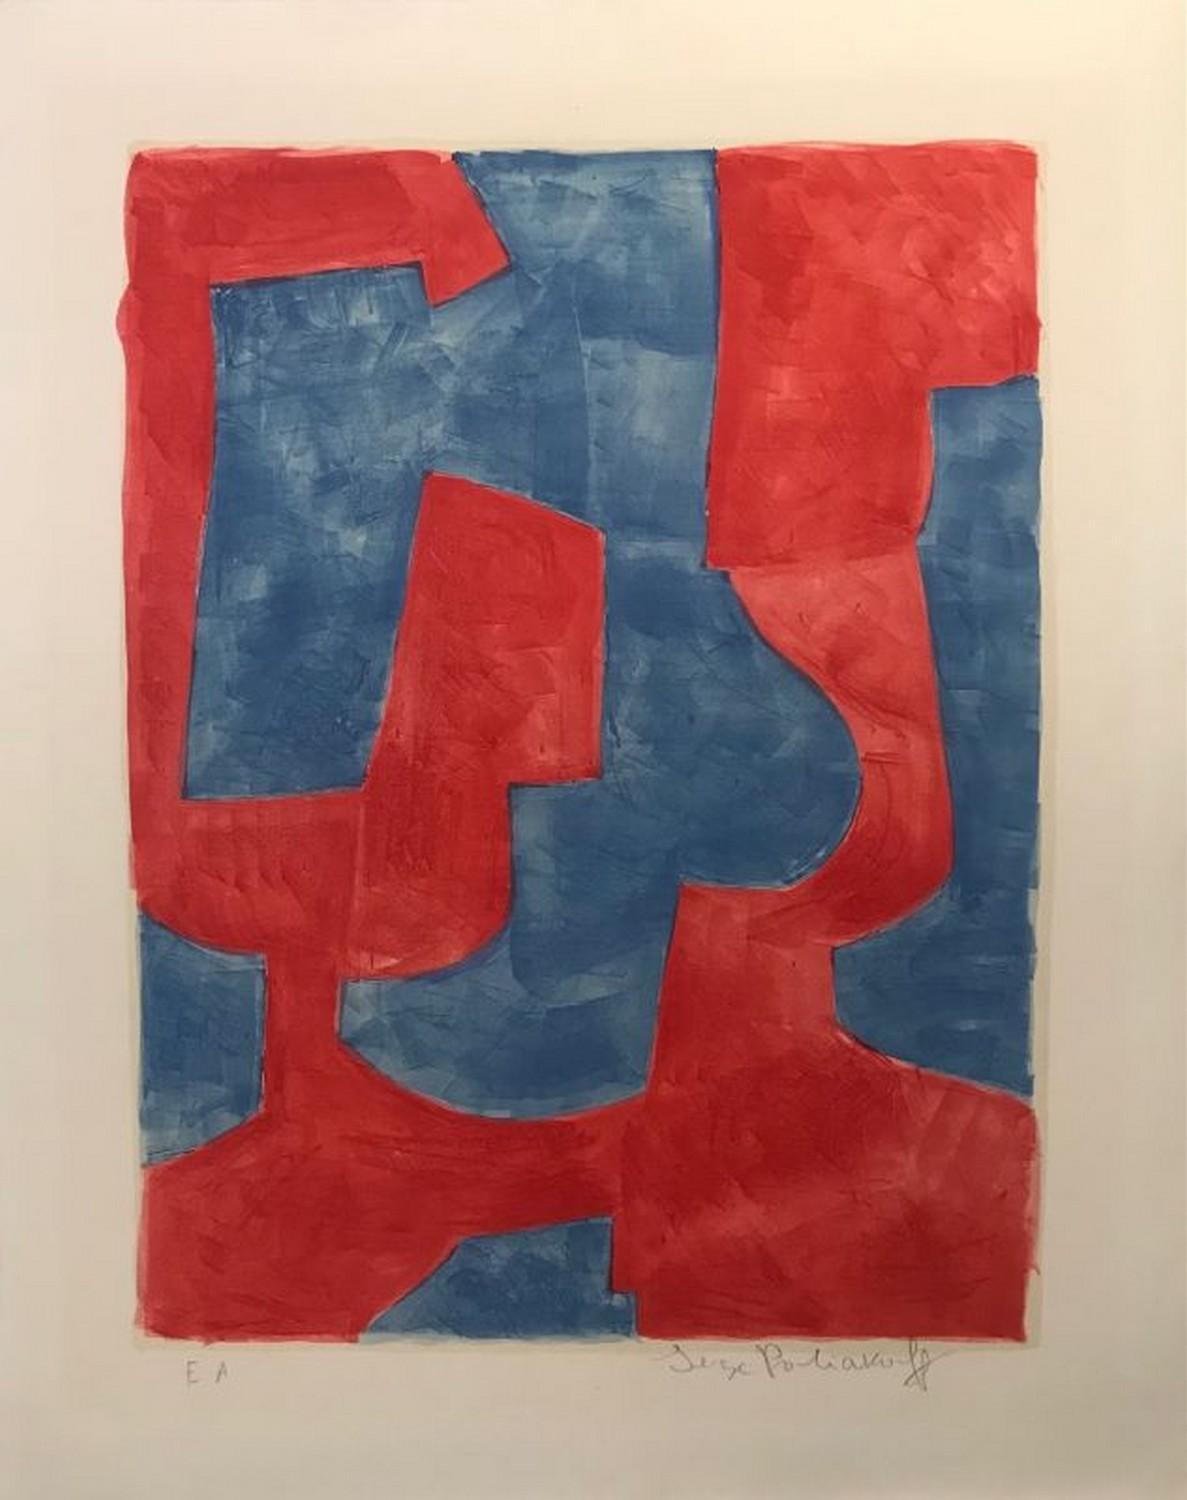 Serge Poliakoff Abstract Print – Komposition bleue et rouge L57 